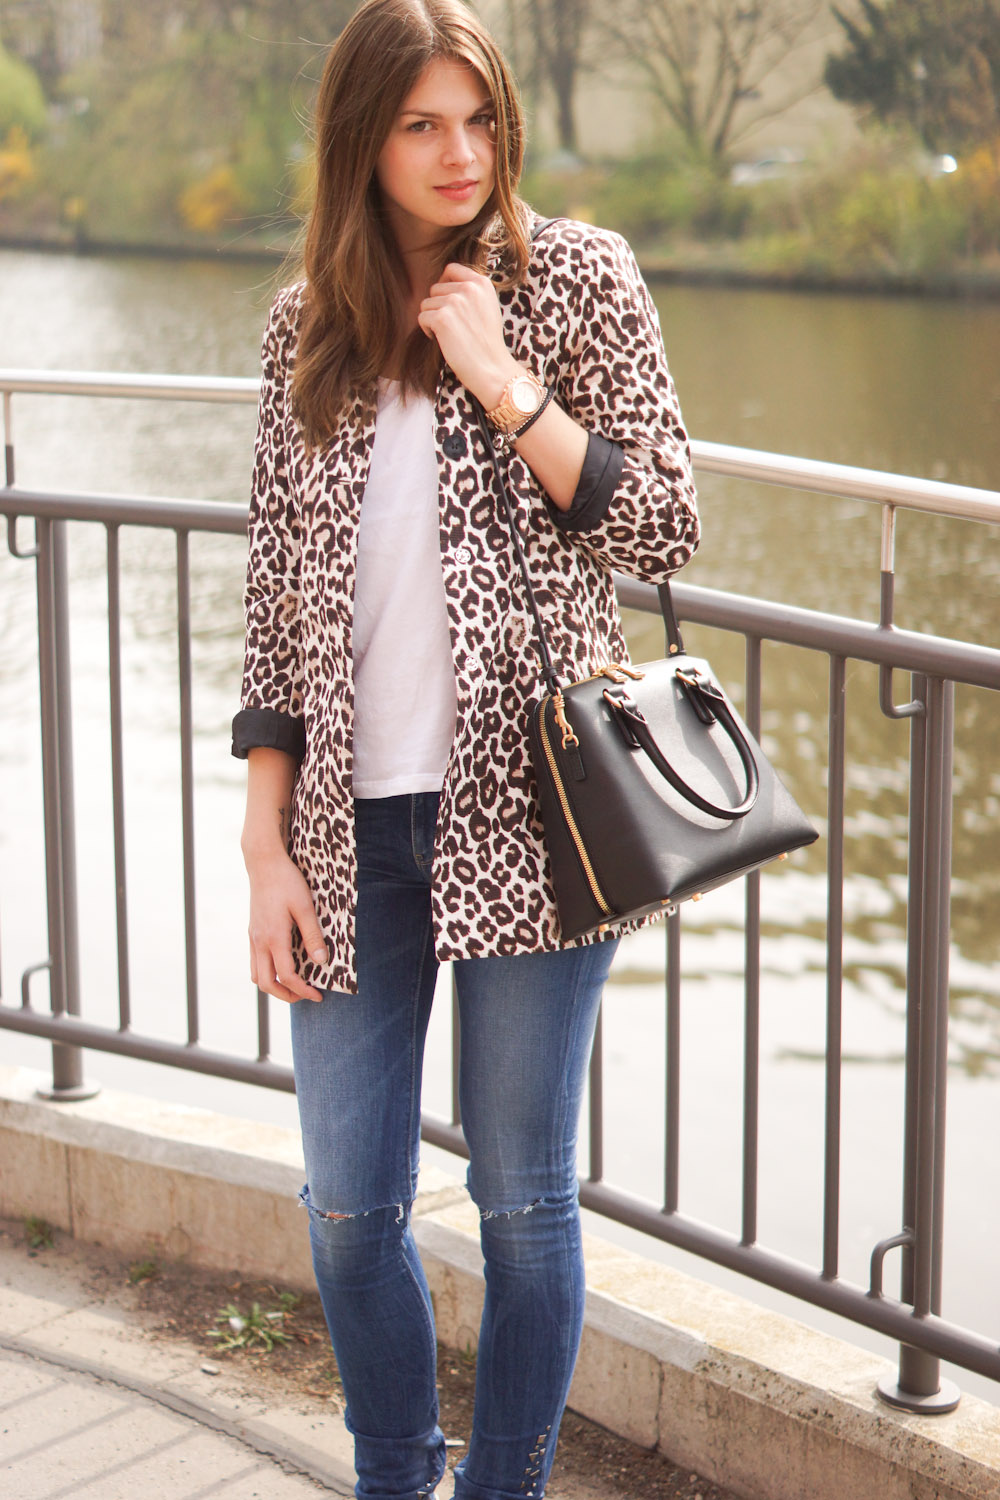 Mixing Prints - Leopard and Snake